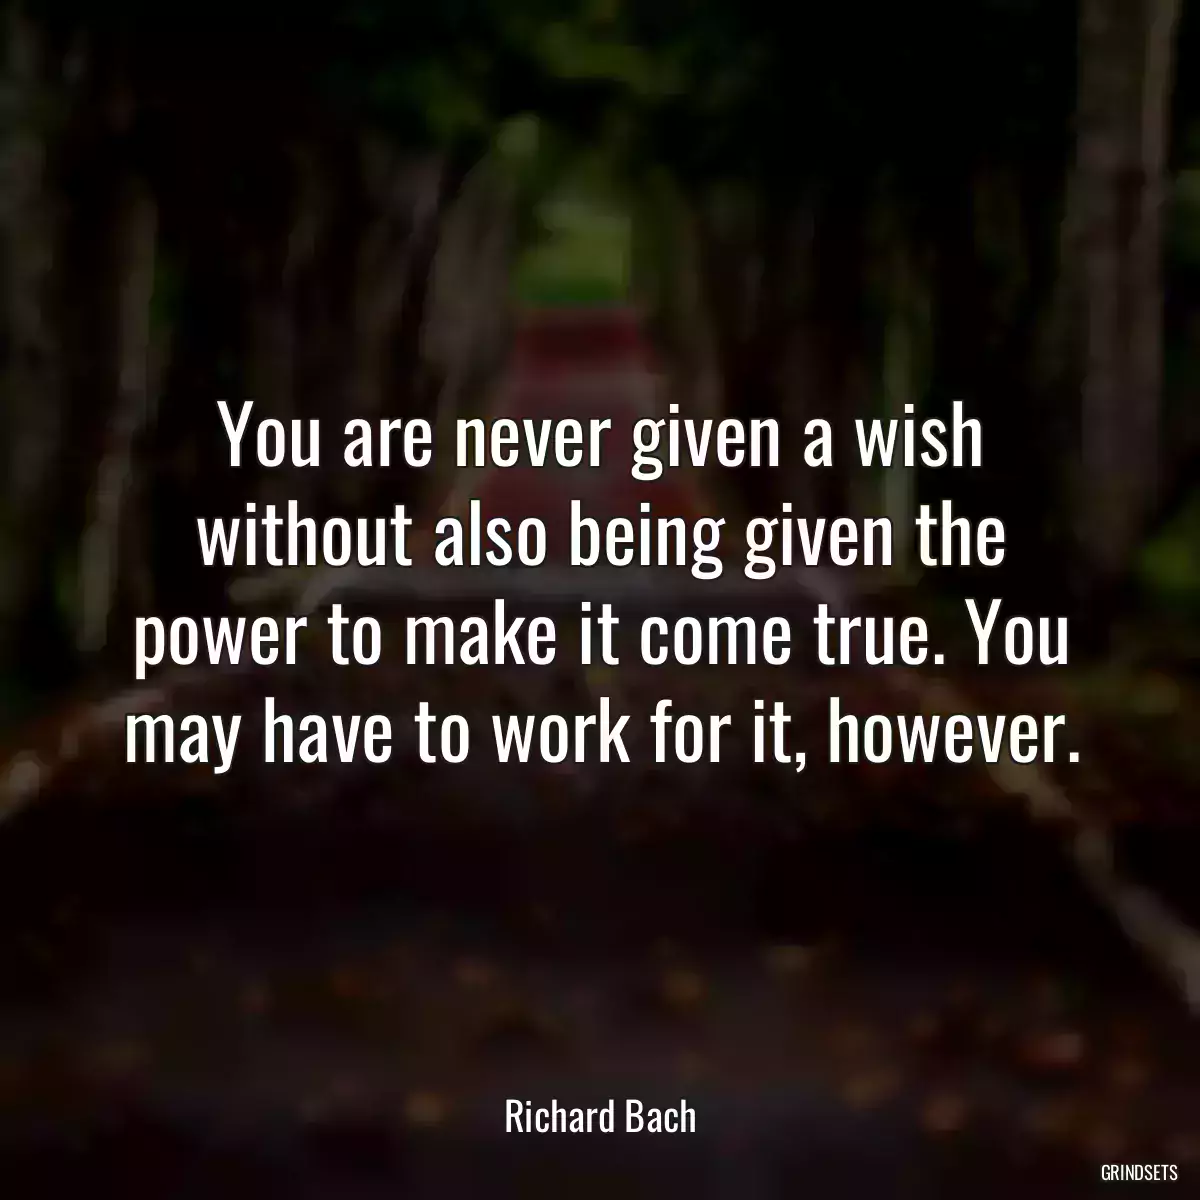 You are never given a wish without also being given the power to make it come true. You may have to work for it, however.